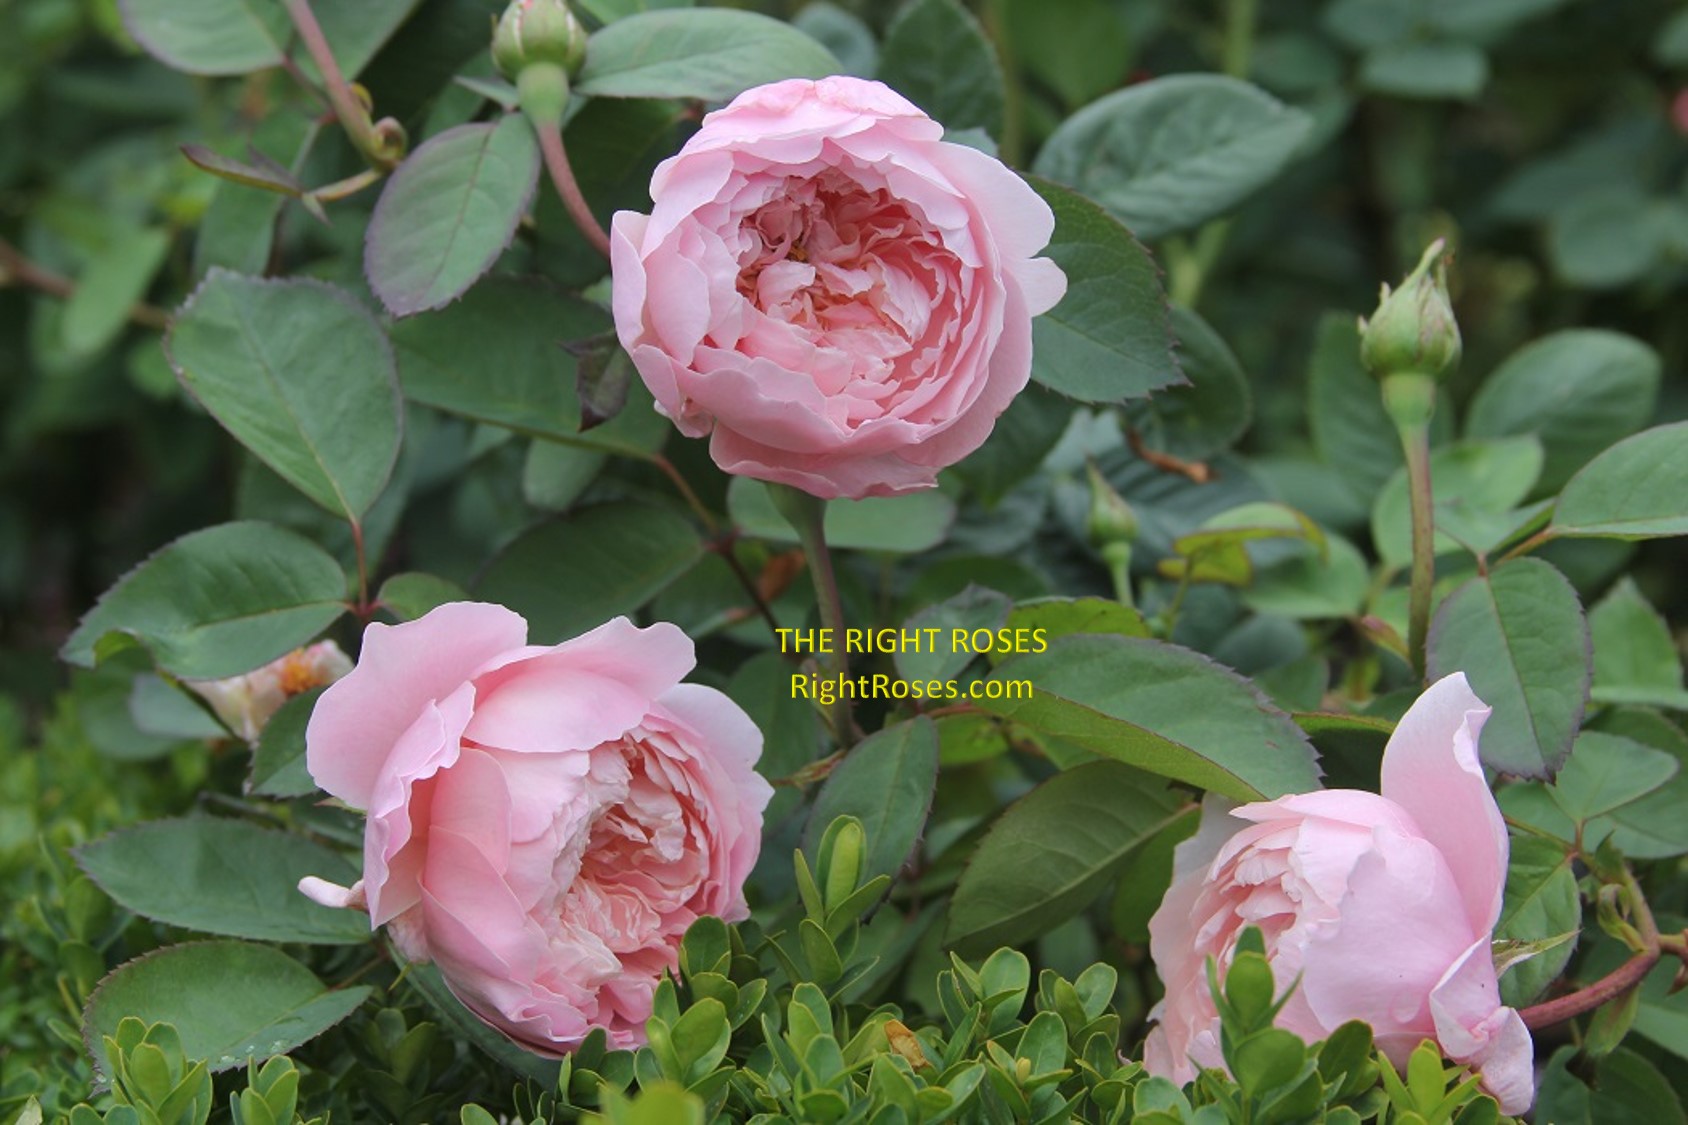 the Alnwick rose review the right roses score best top garden store david austin english roses rose products rose rating the right leap rose food fertilizer